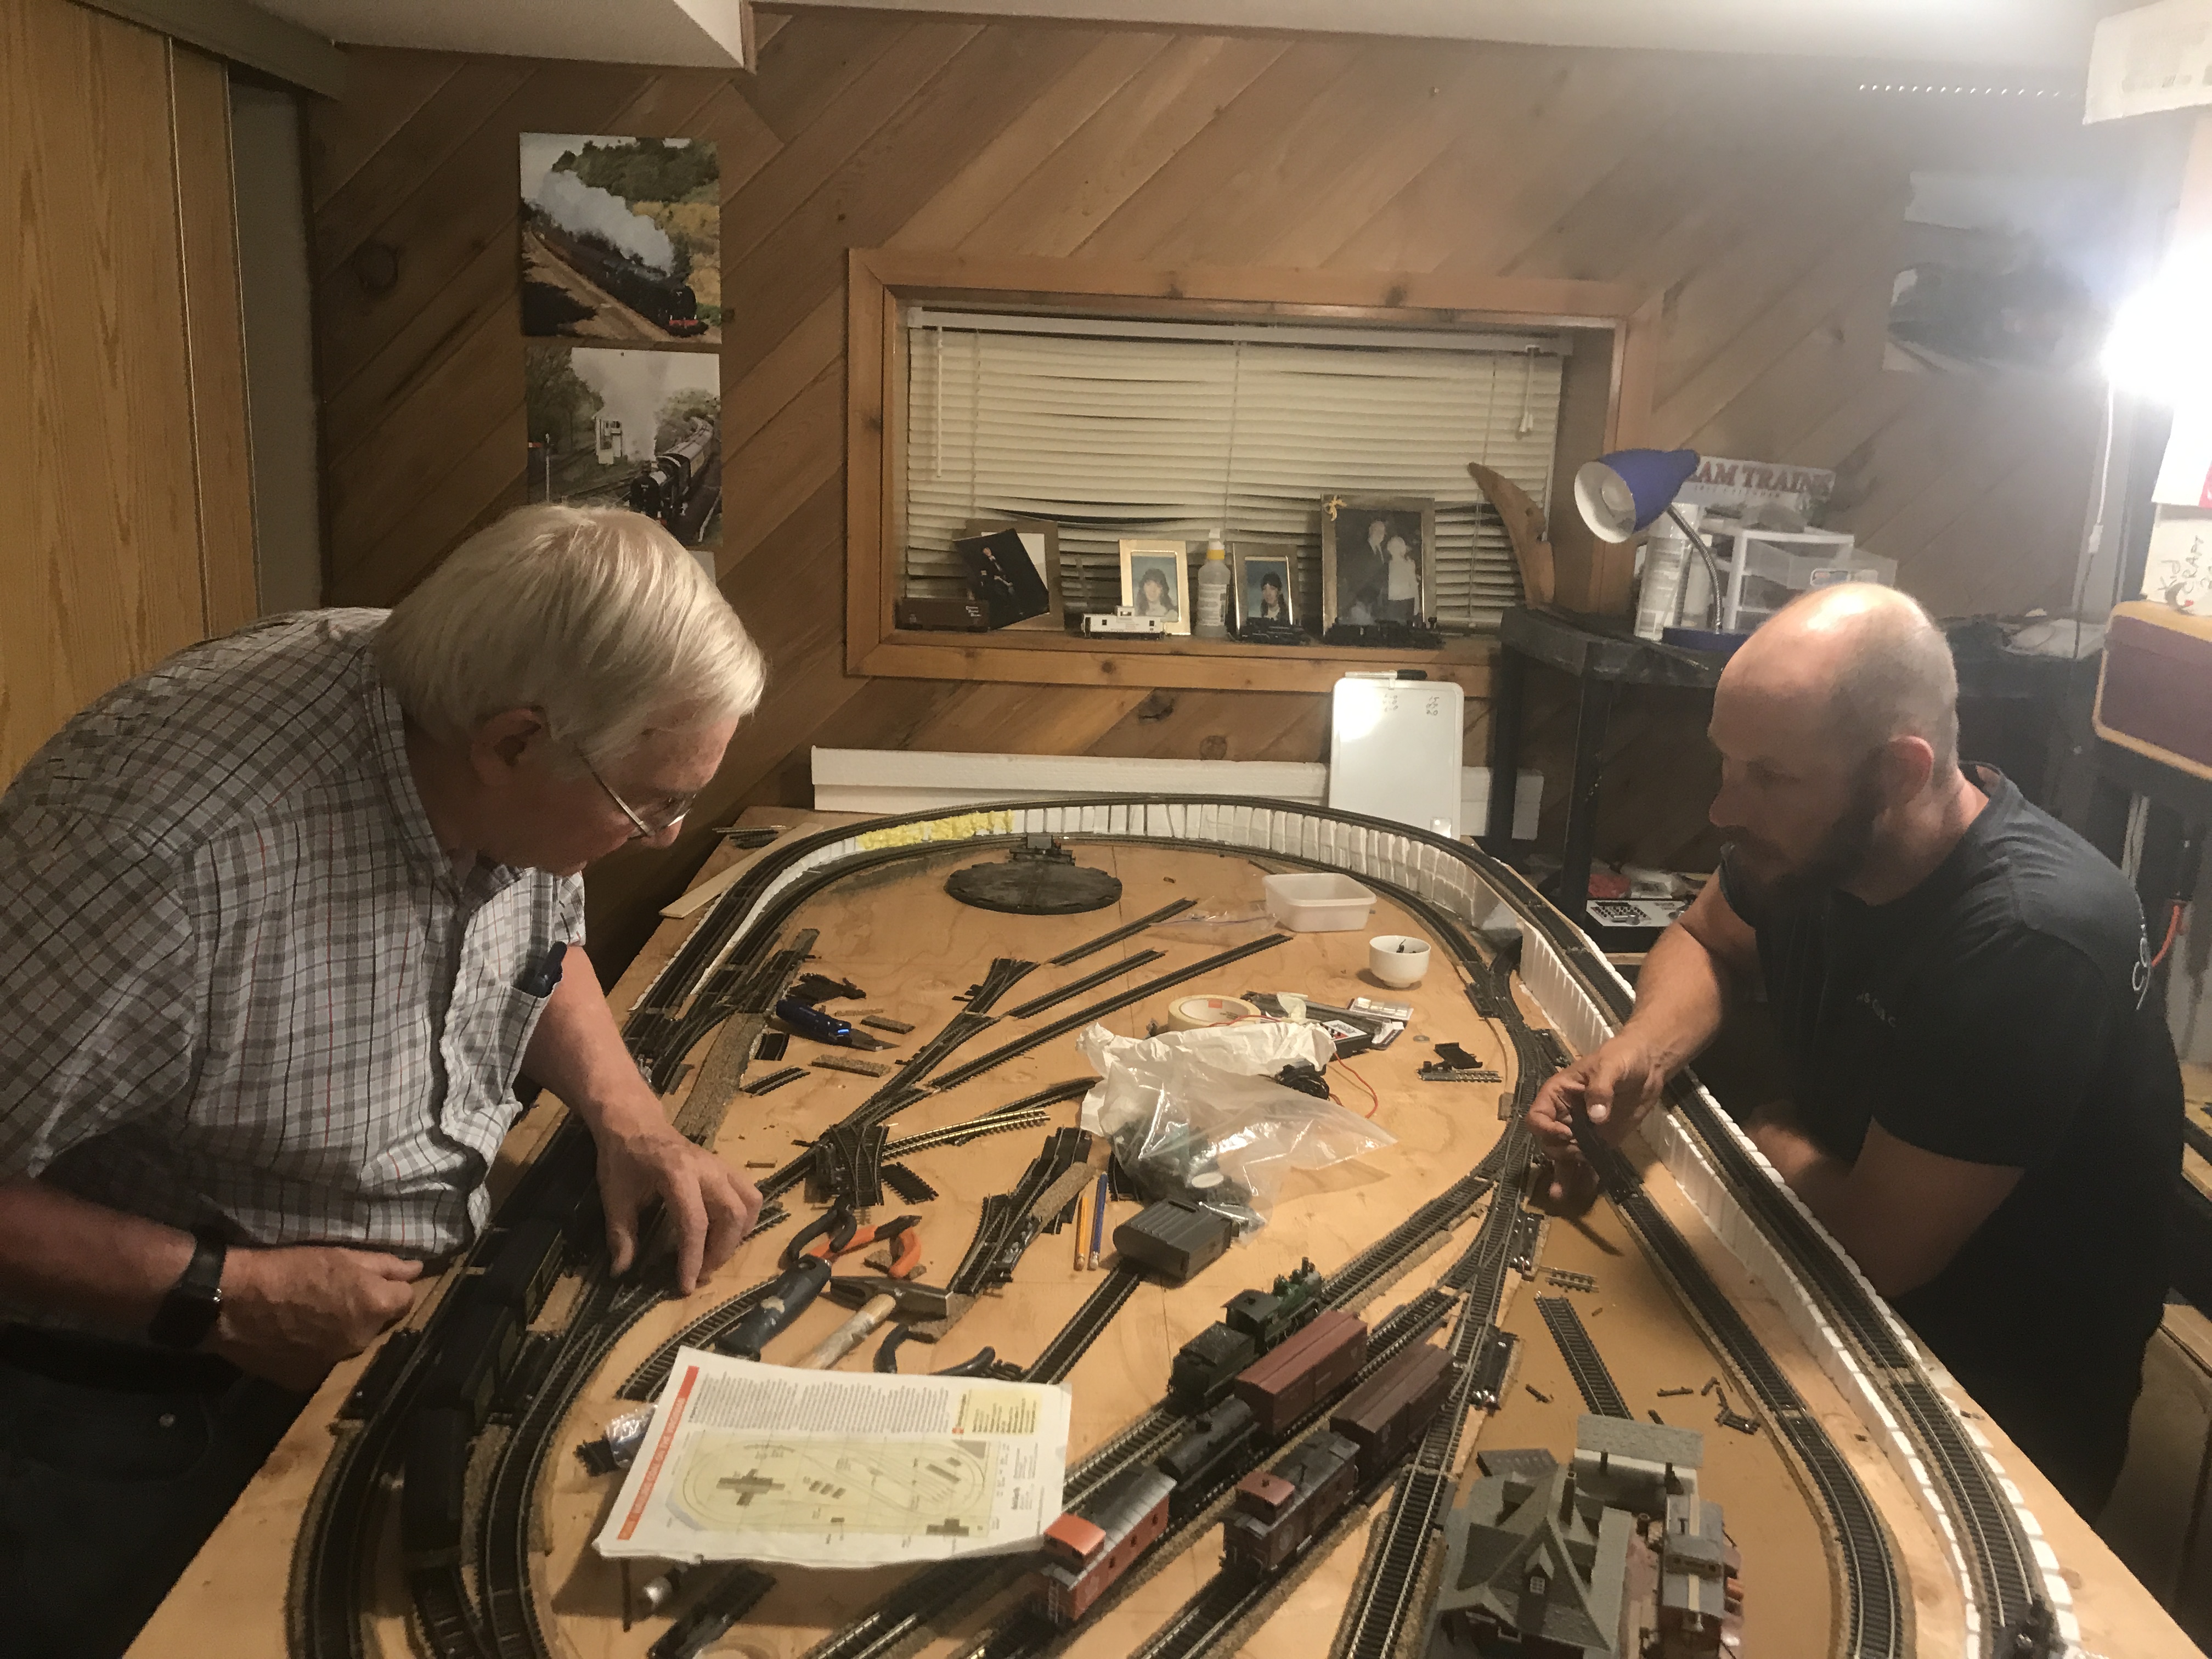 Peter and his son in law James doing model railroading.